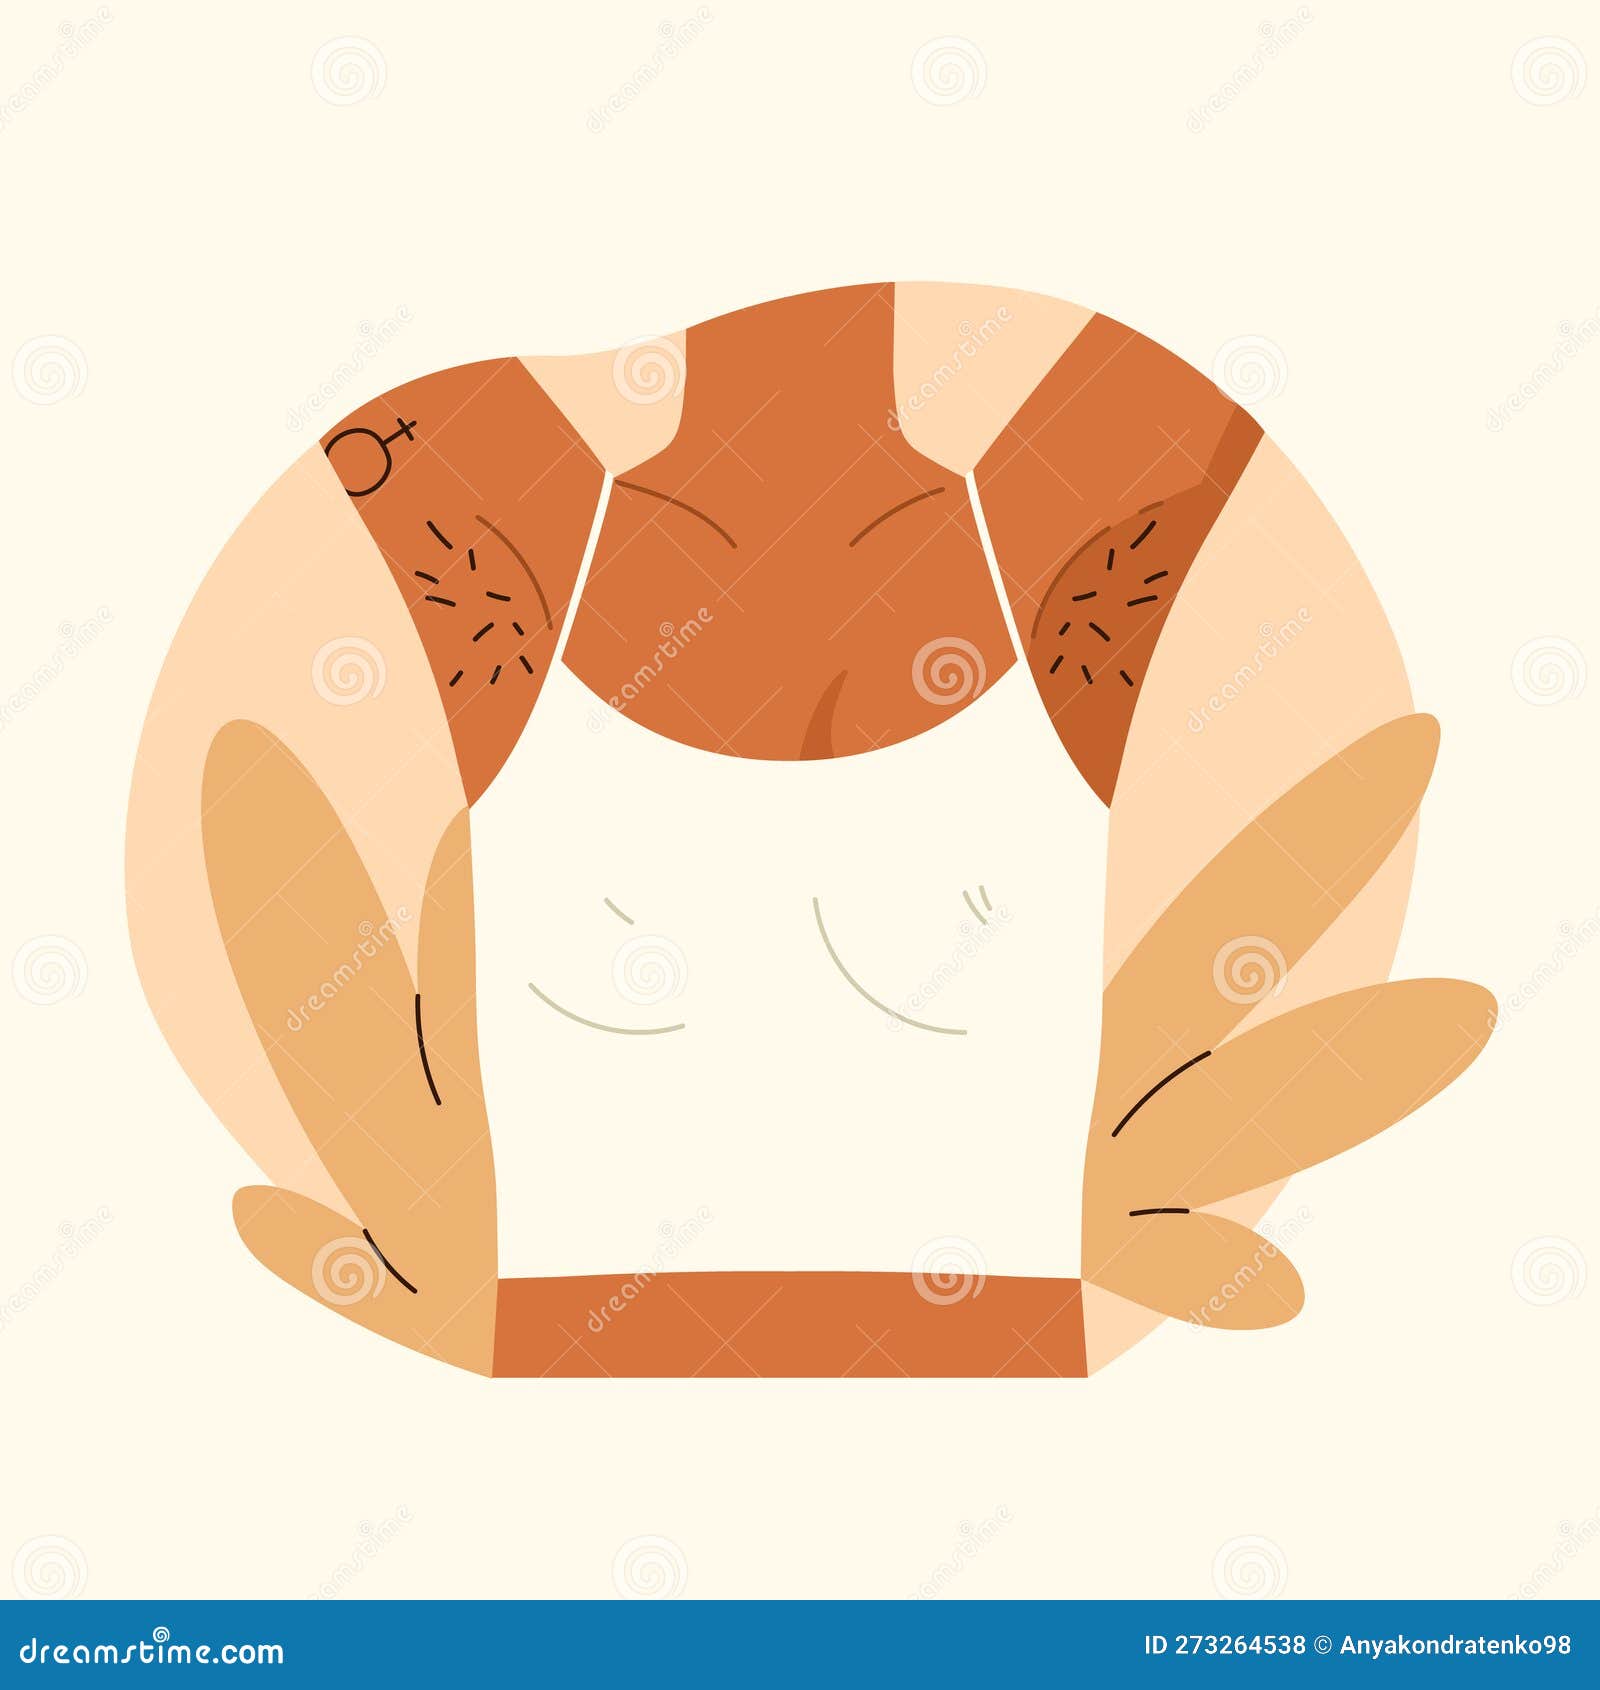 Armpit Hair Before And After Laser Removal Vector Cartoon Isolated Art On White Background